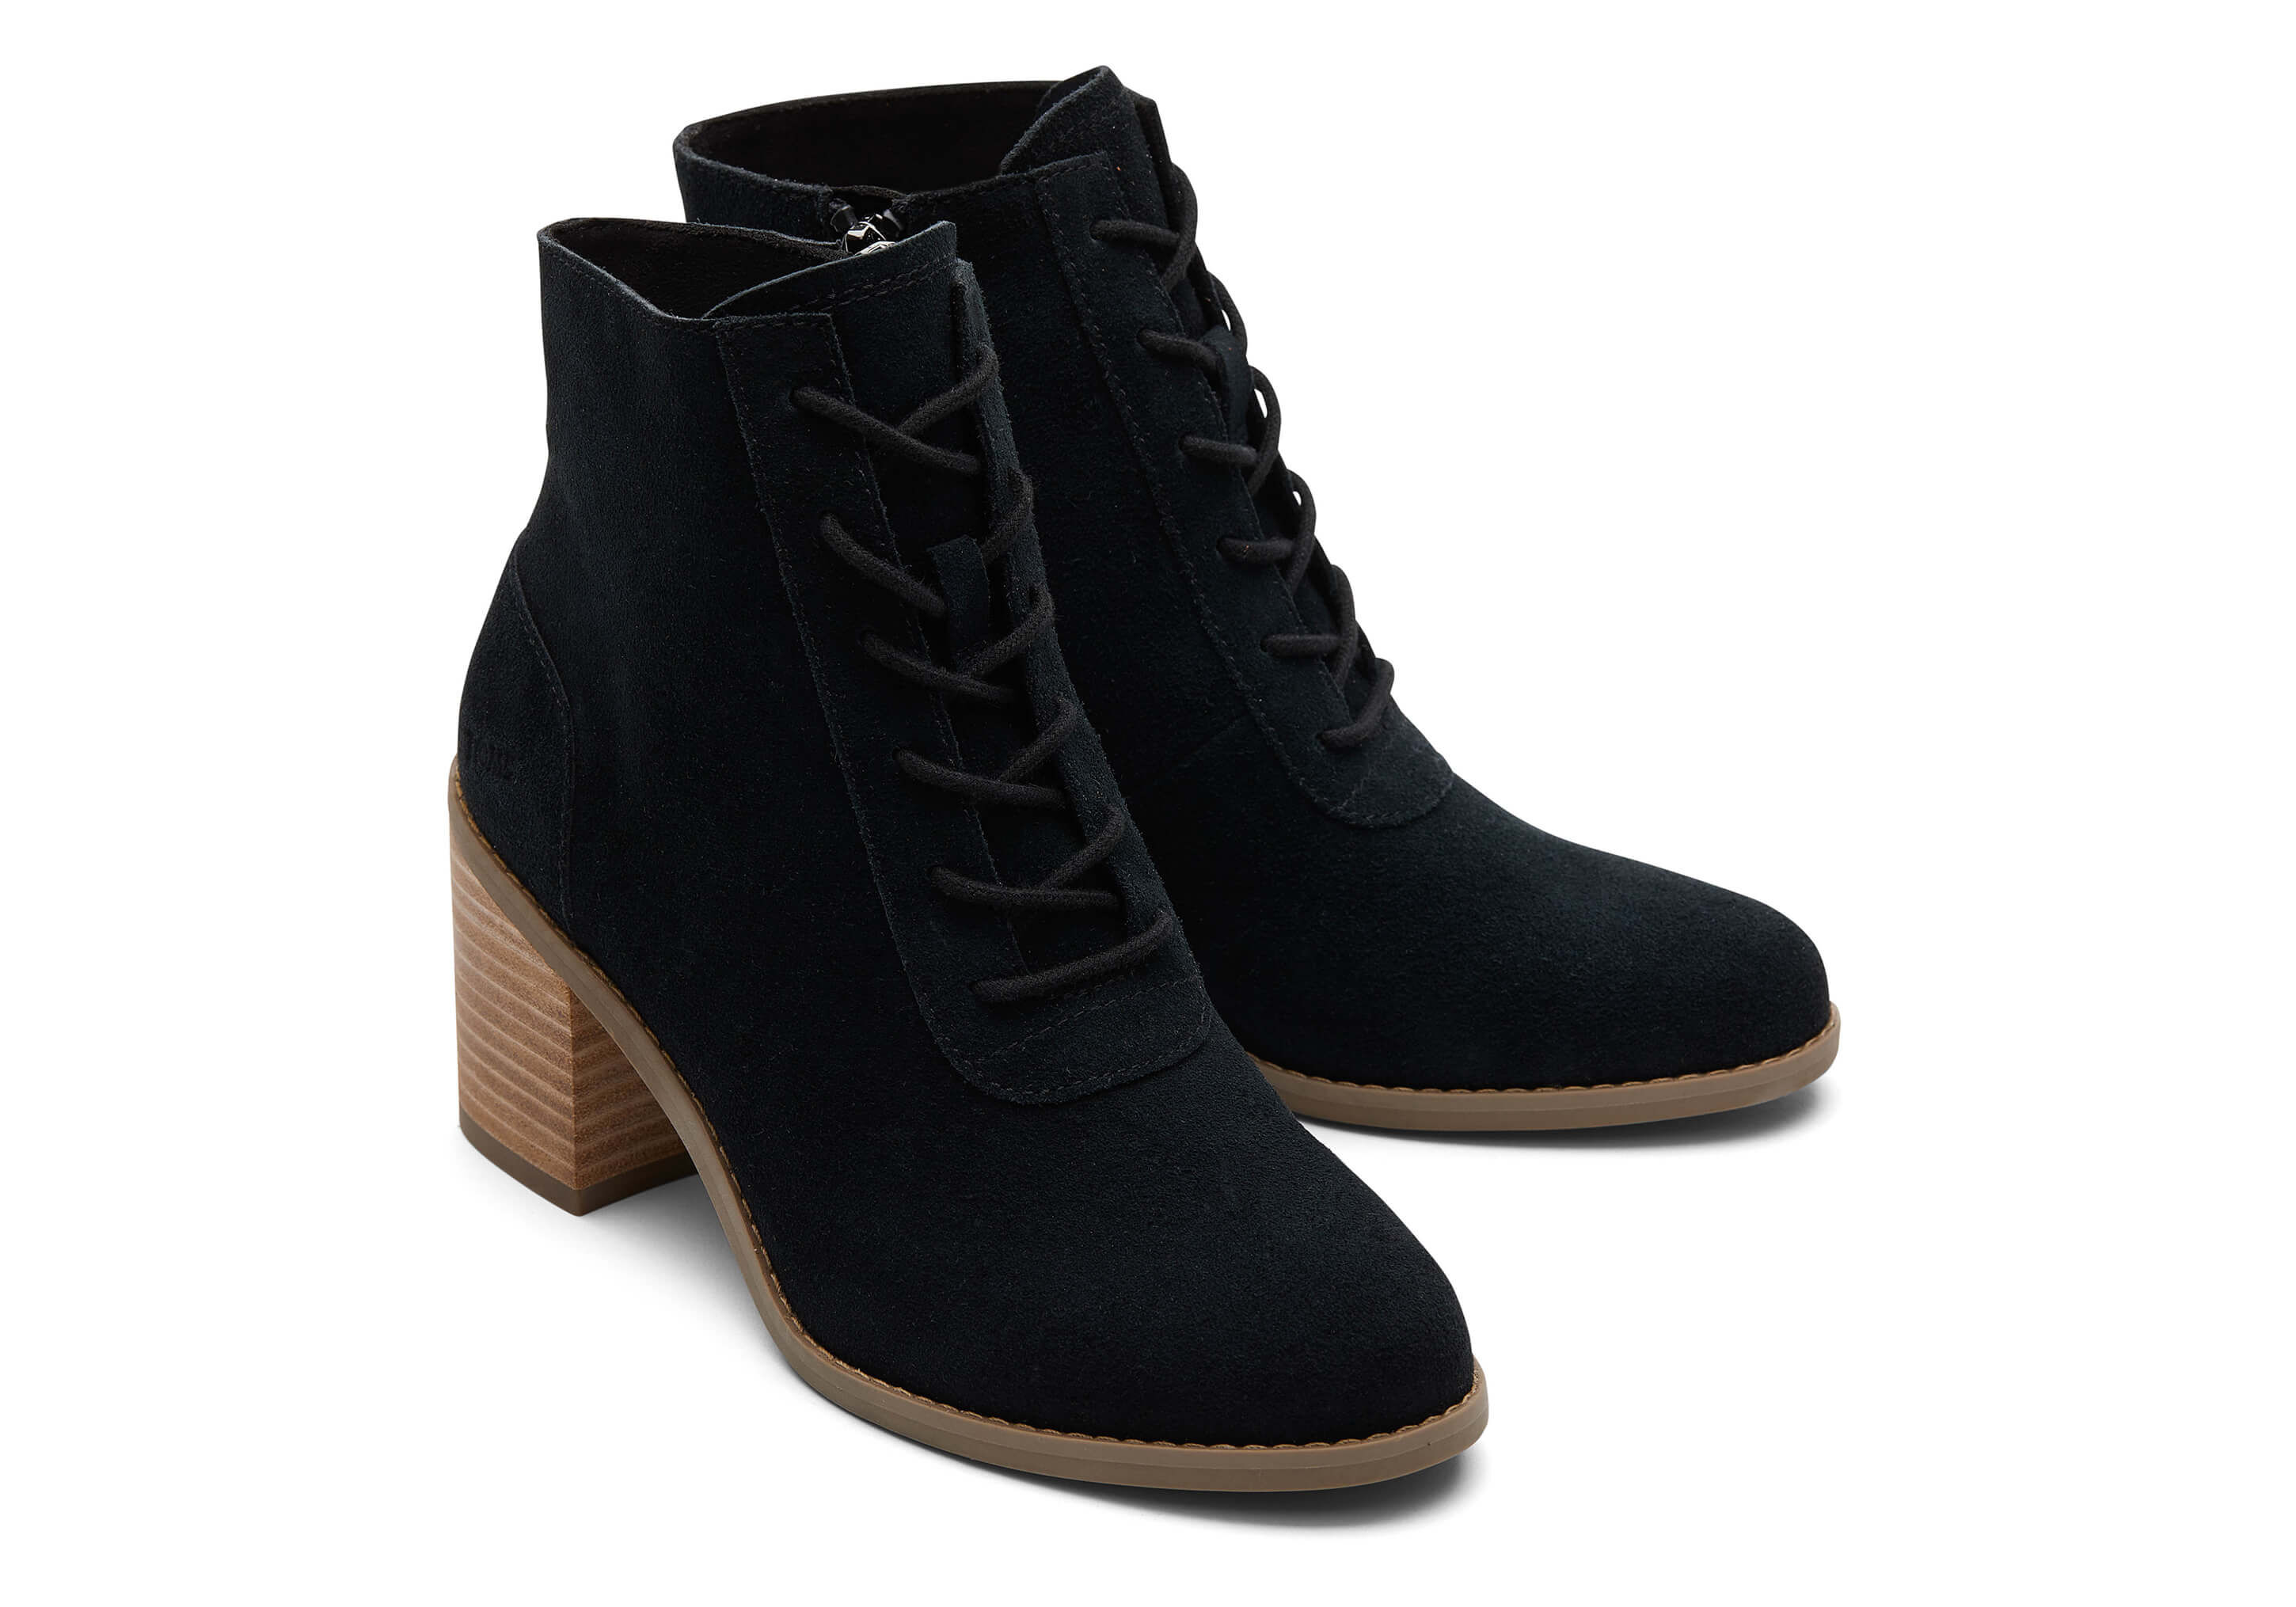 Wello - Lace-Up Platform Chunky Heel Ankle Boots | YesStyle